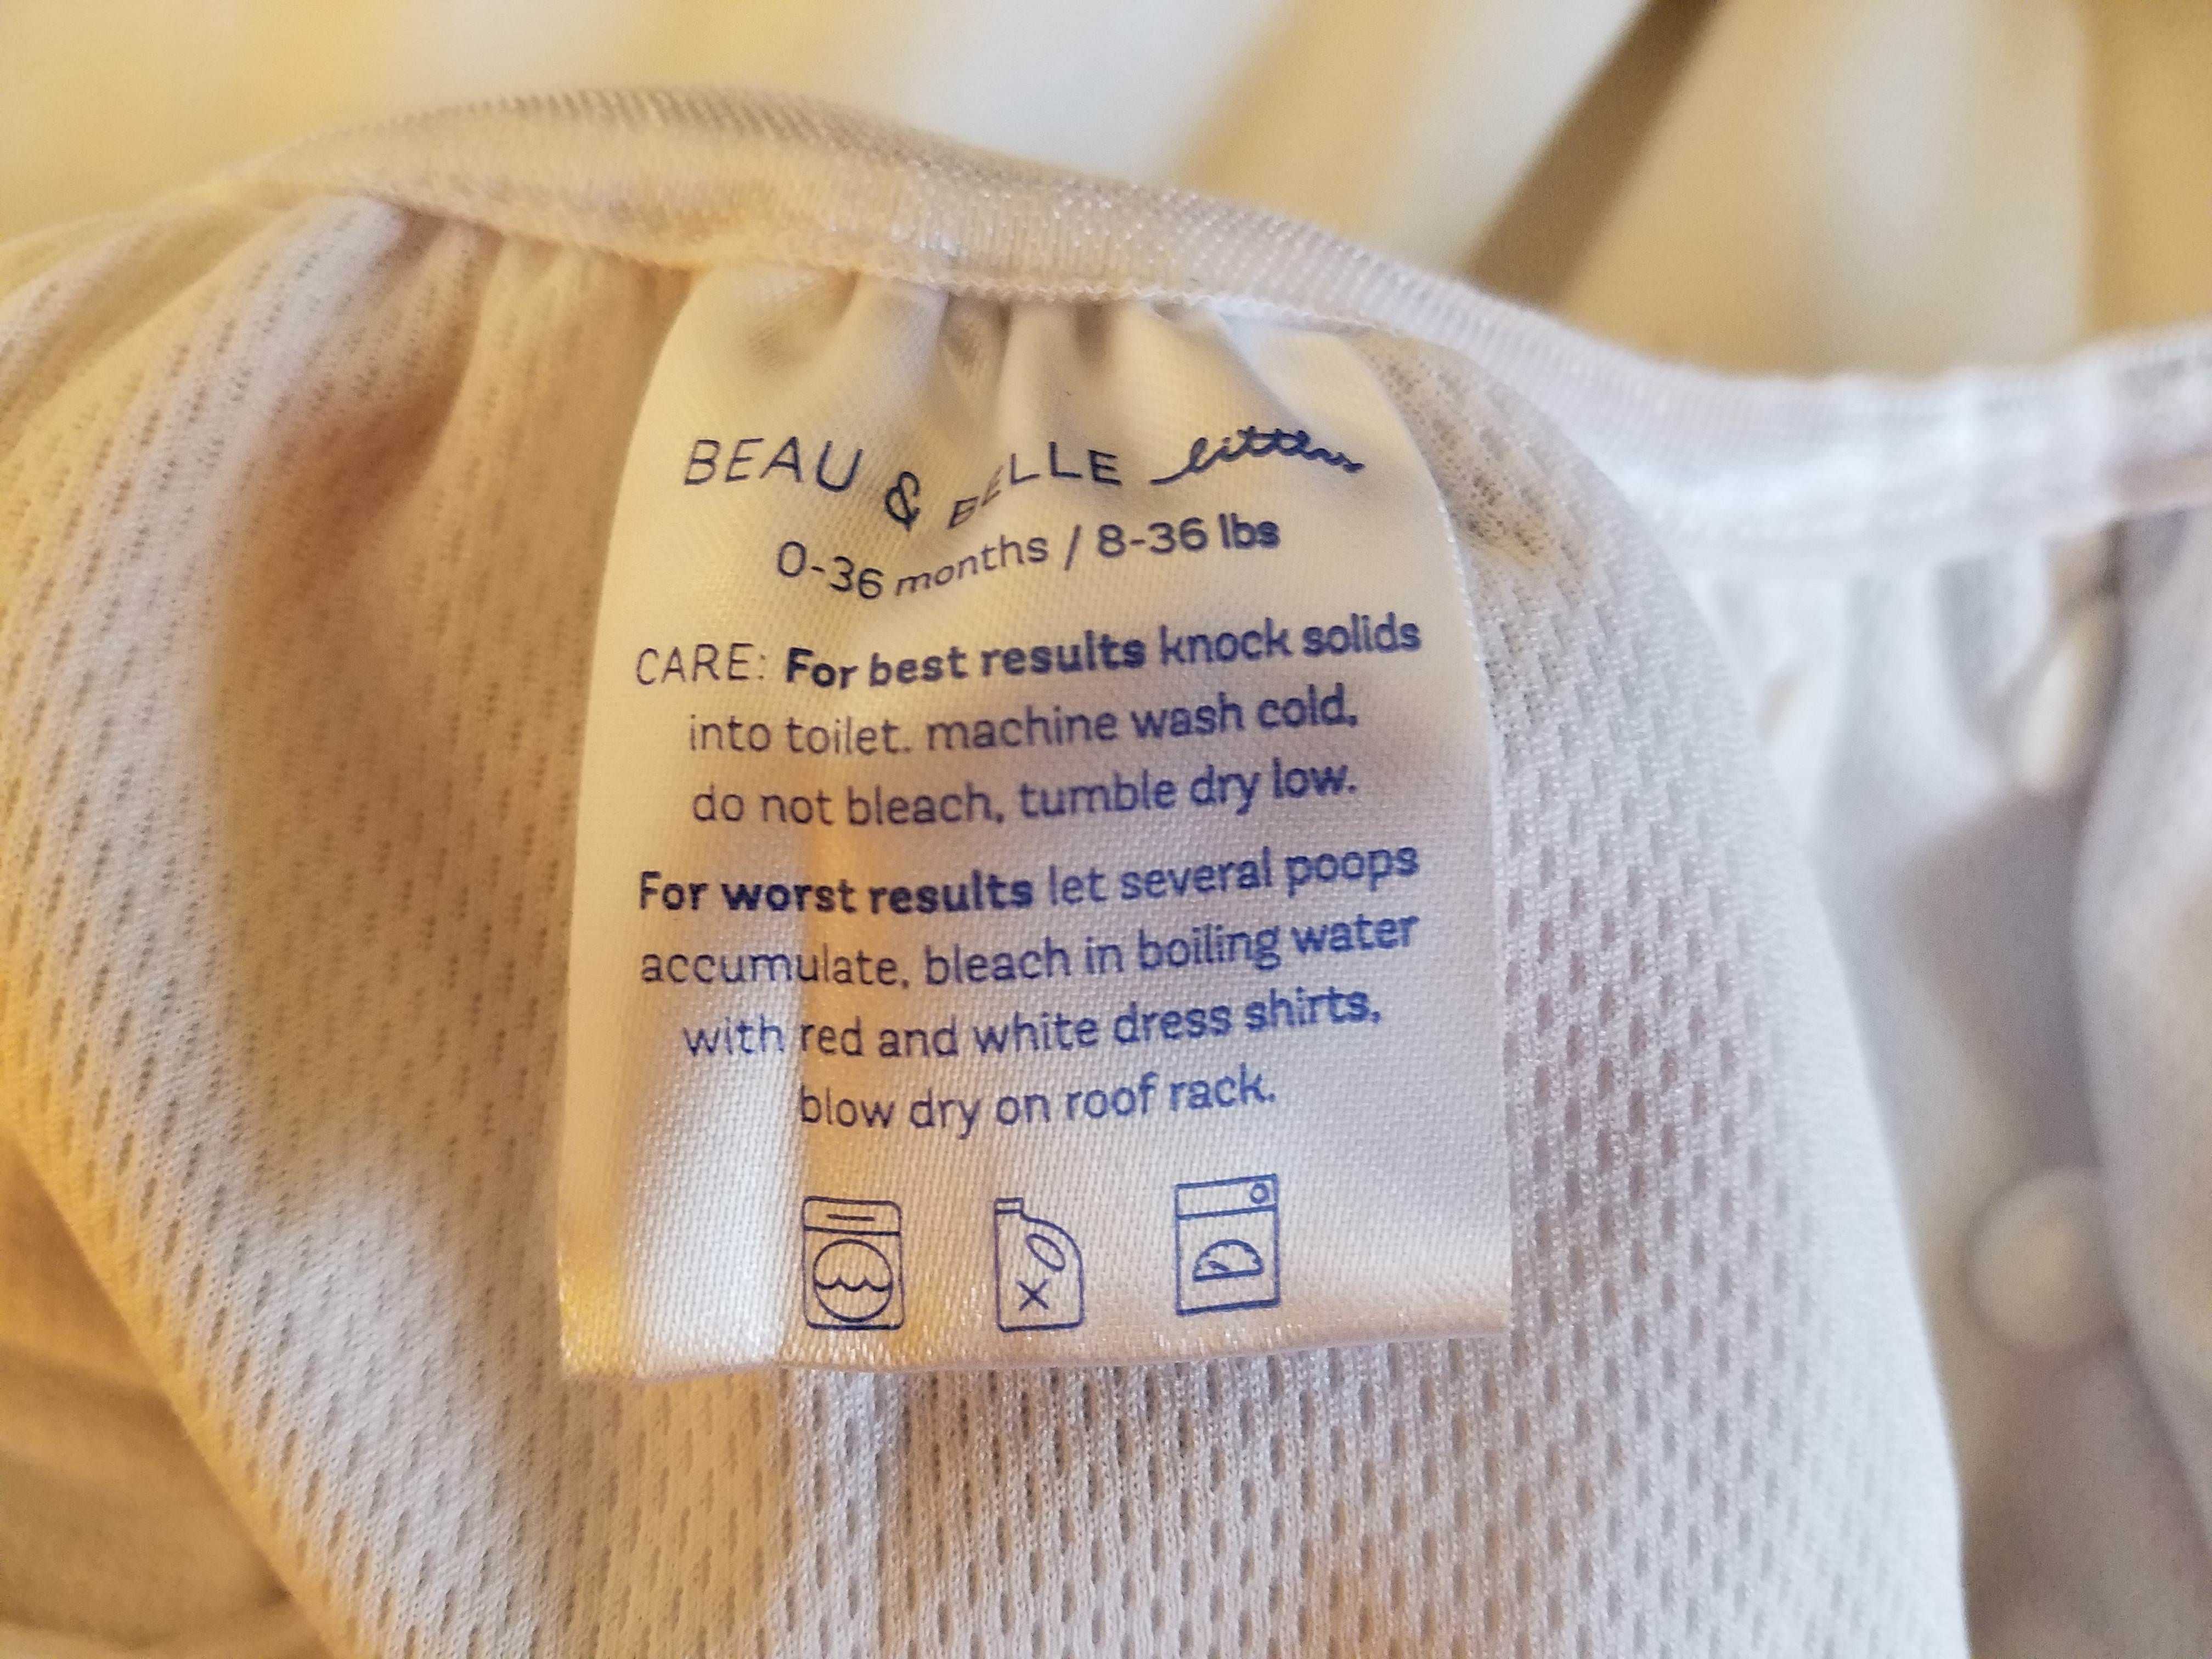 These care instructions on my son's swim diaper